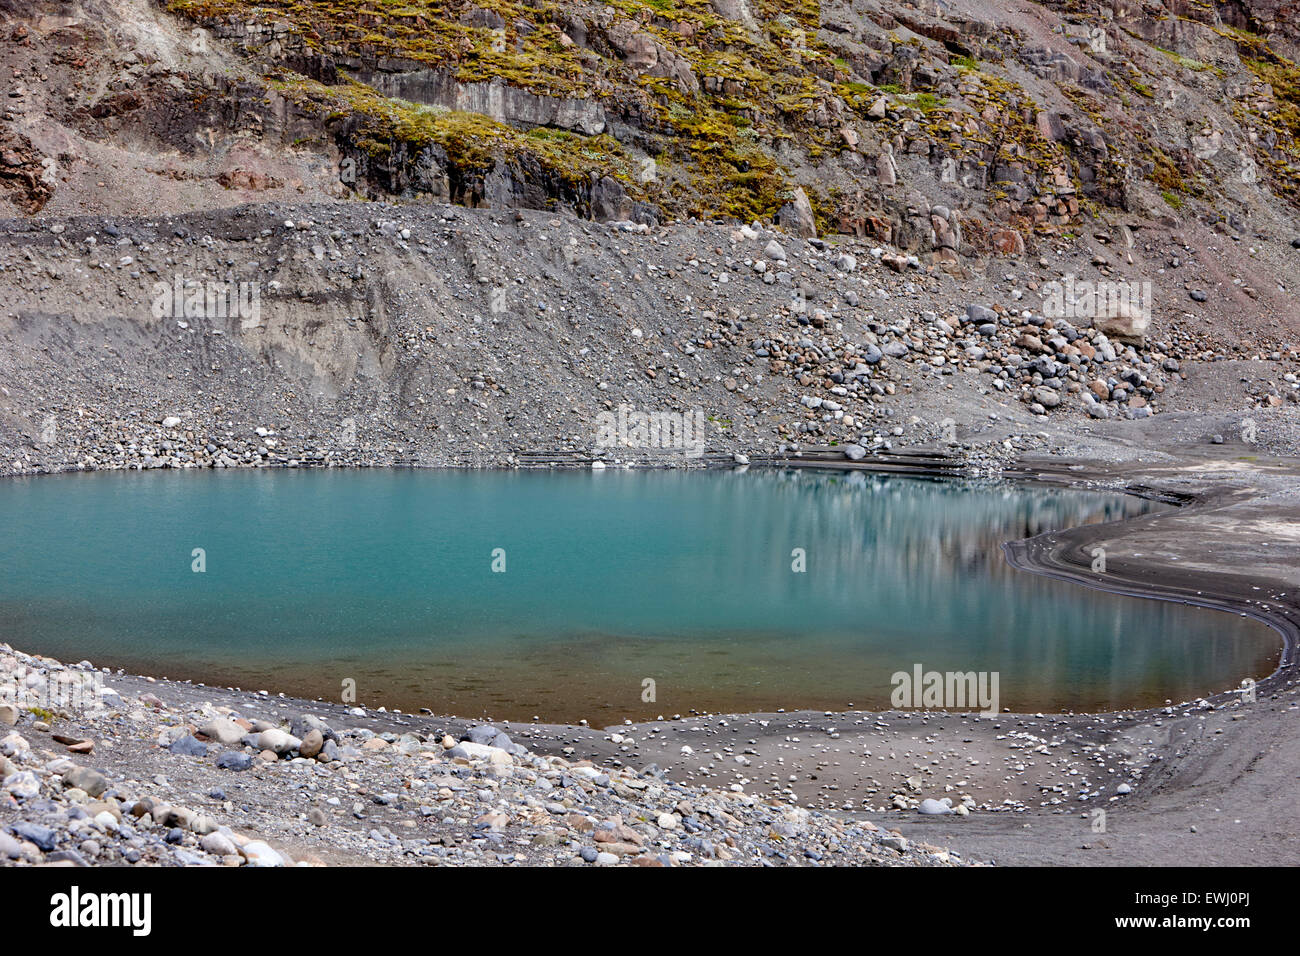 kettle hole rock formations filled with blue water left behind by glacier Iceland Stock Photo